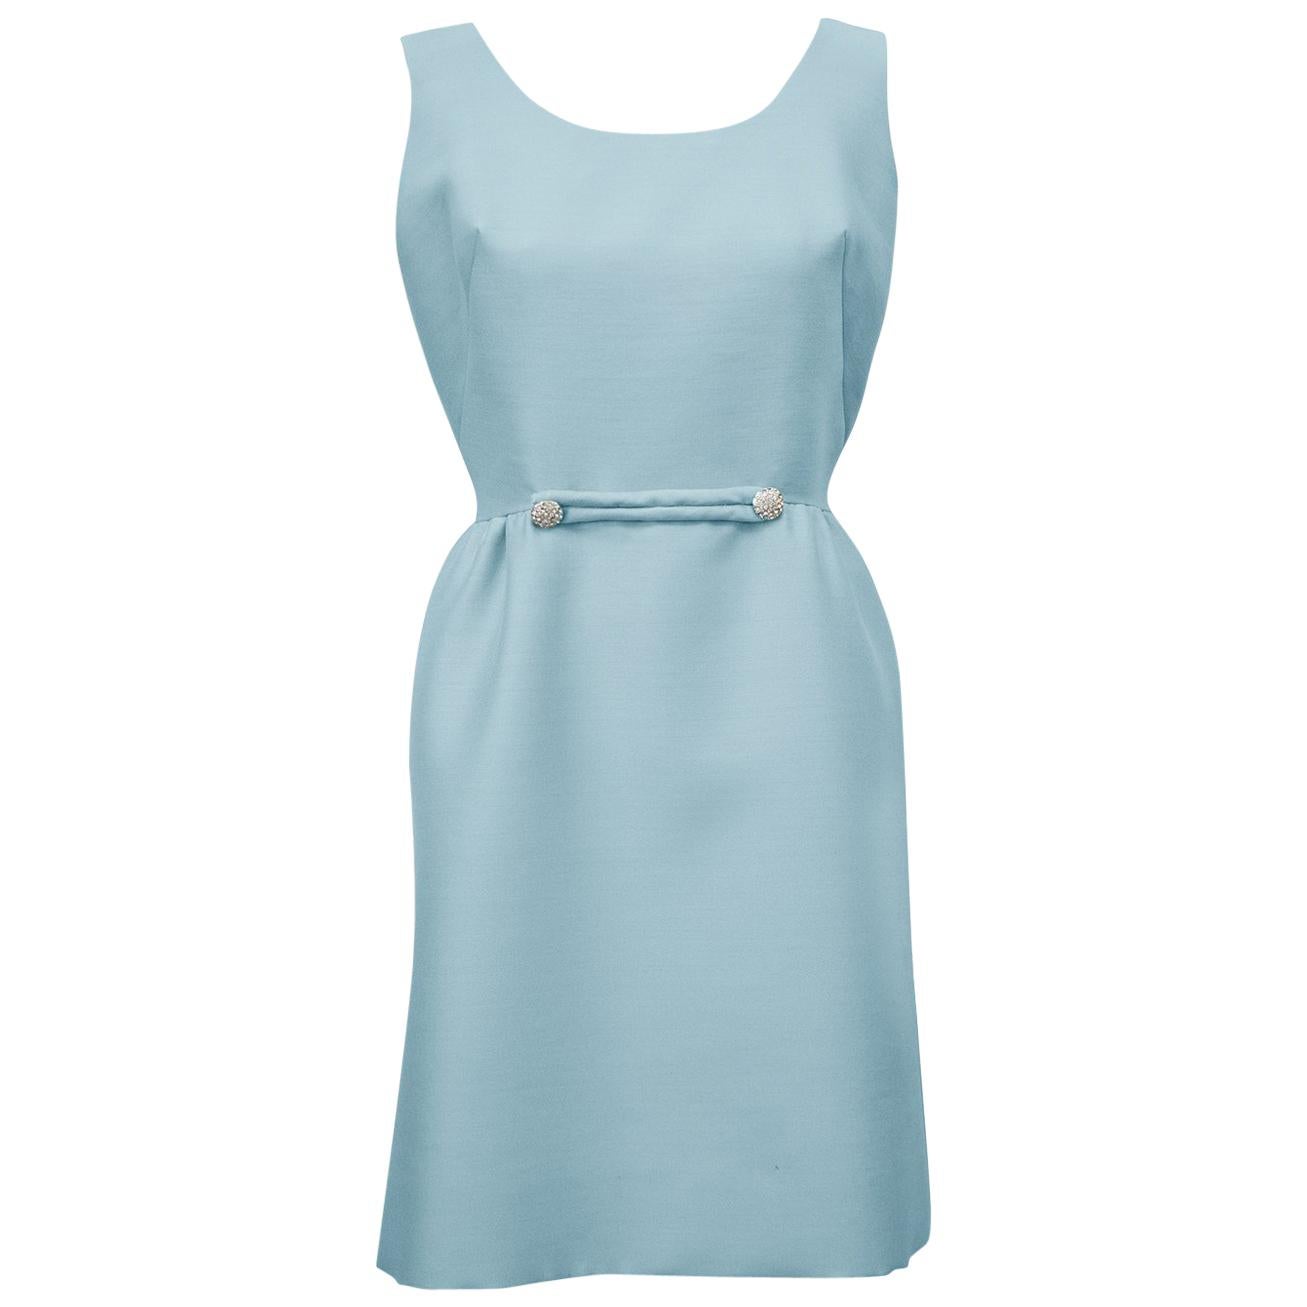 1960s Anonymous Robin's Egg Blue Cocktail Dress